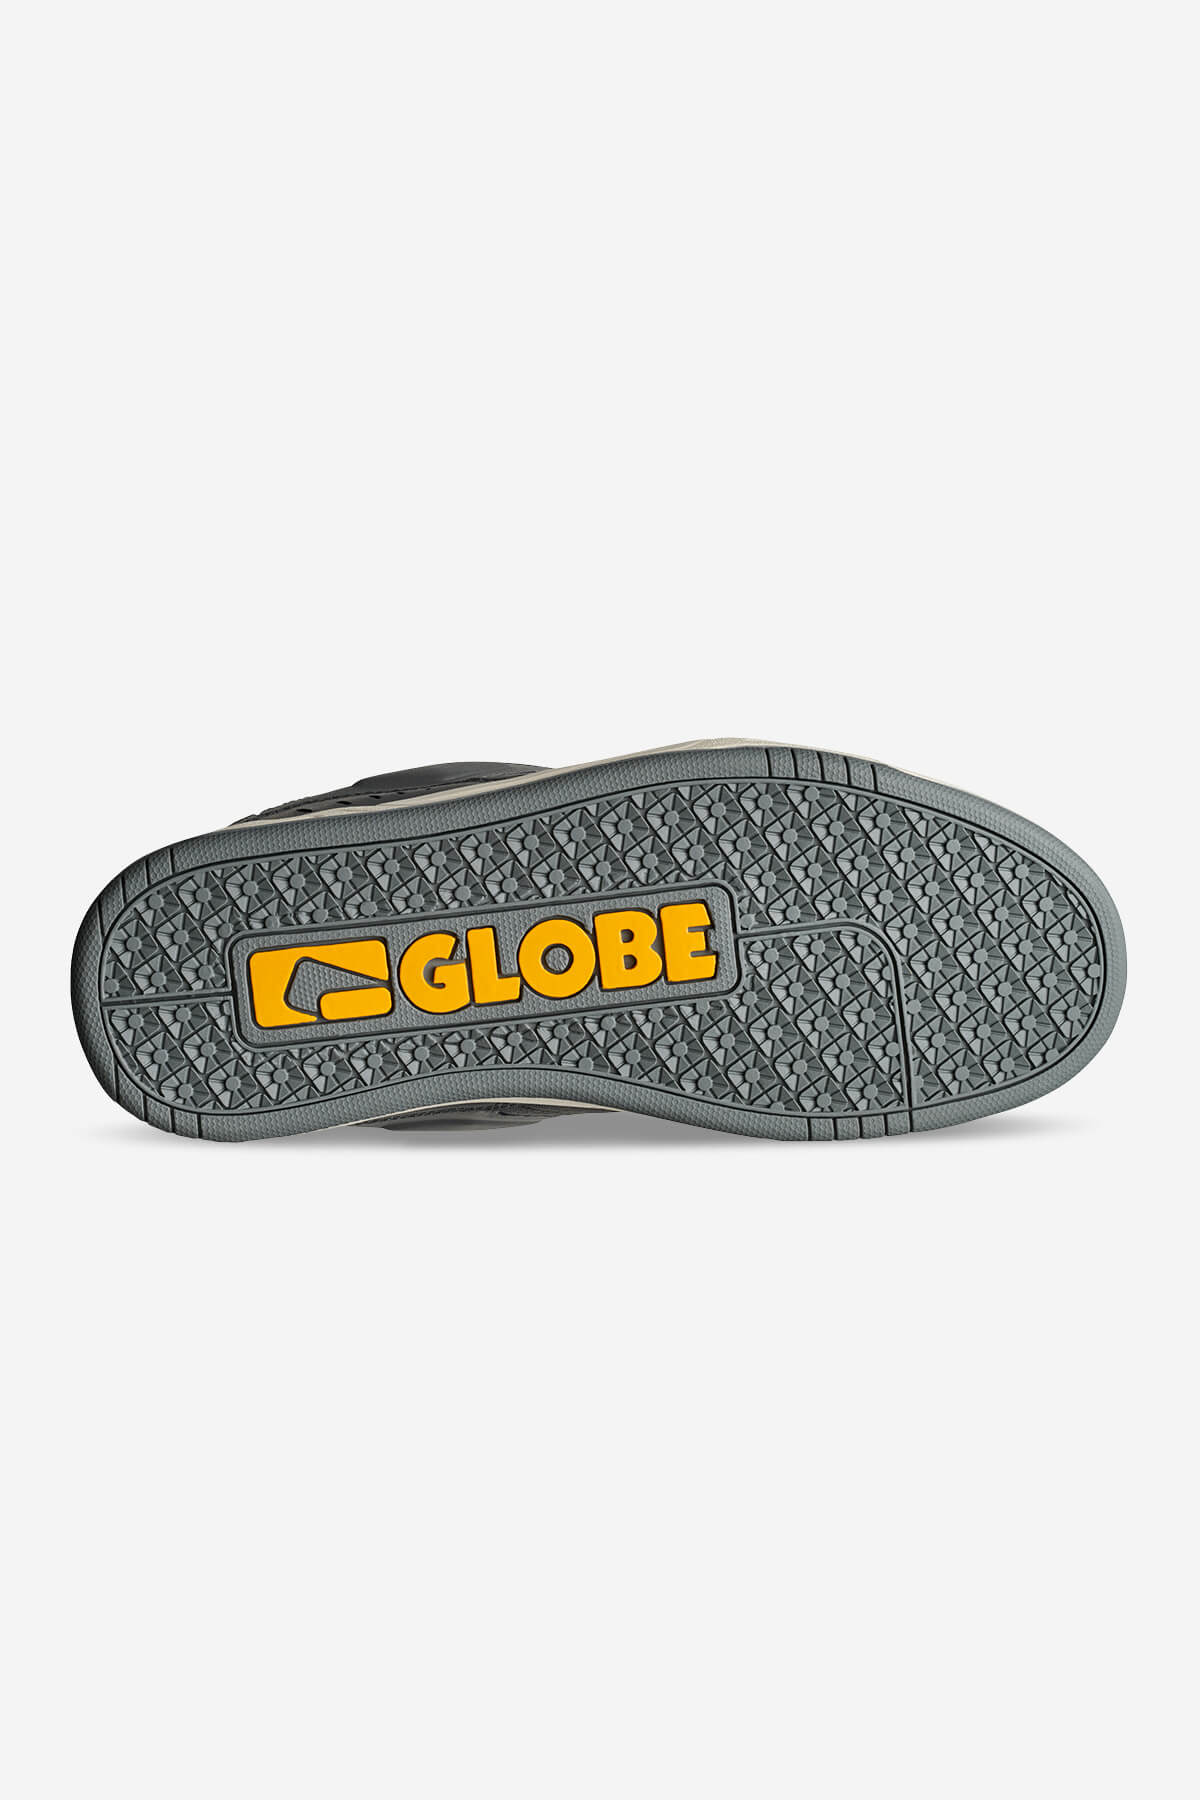 Globe FOOTWEAR [SELECT SERIES] Fusion - Lead/Antique in Lead/Antique